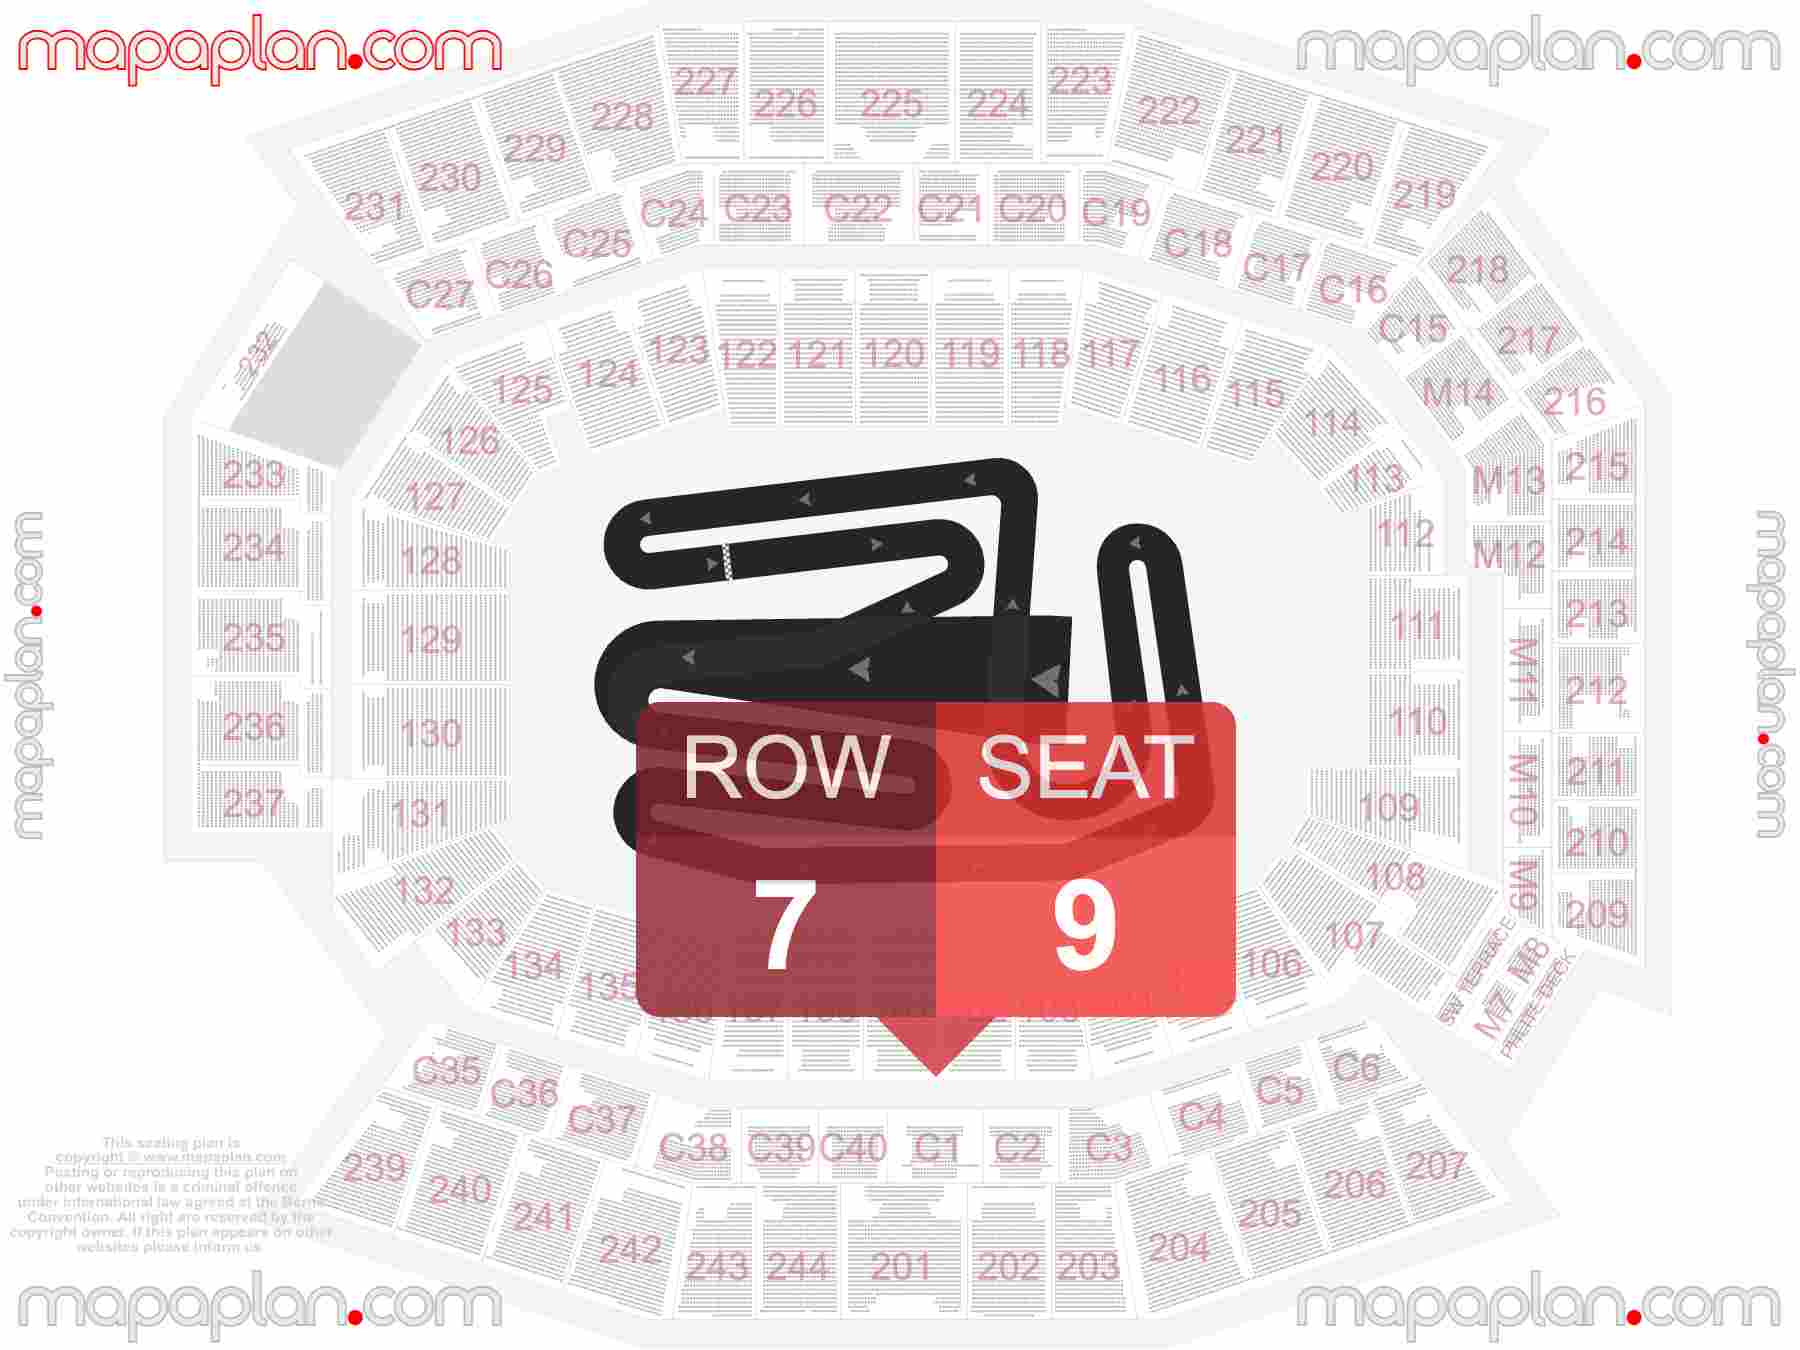 Philadelphia Lincoln Financial Field seating chart Arenacross motorcycle racing precise seat finder - Explore seating chart with exact section, seat and row numbers